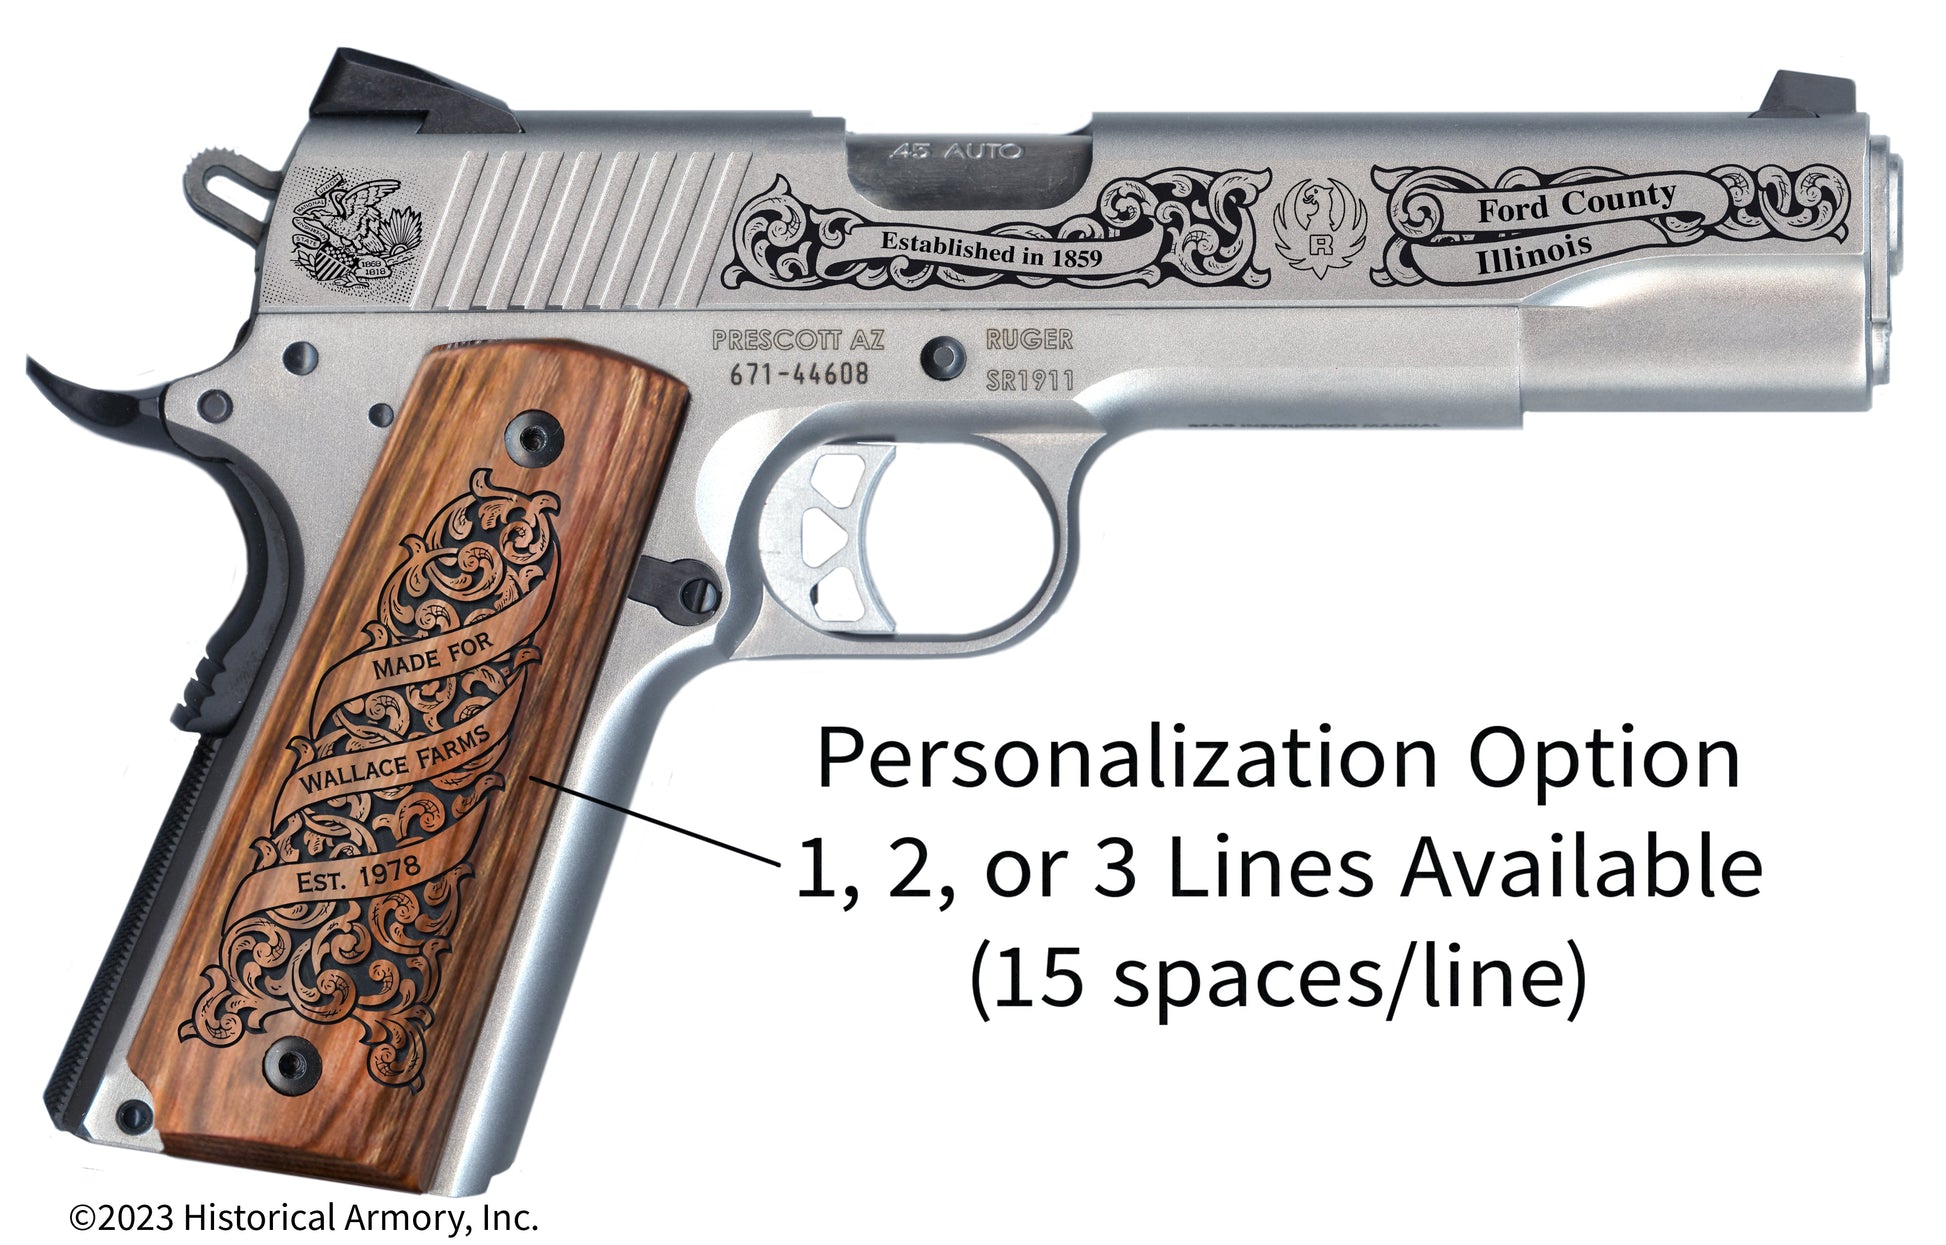 Ford County Illinois Personalized Engraved .45 Auto Ruger 1911